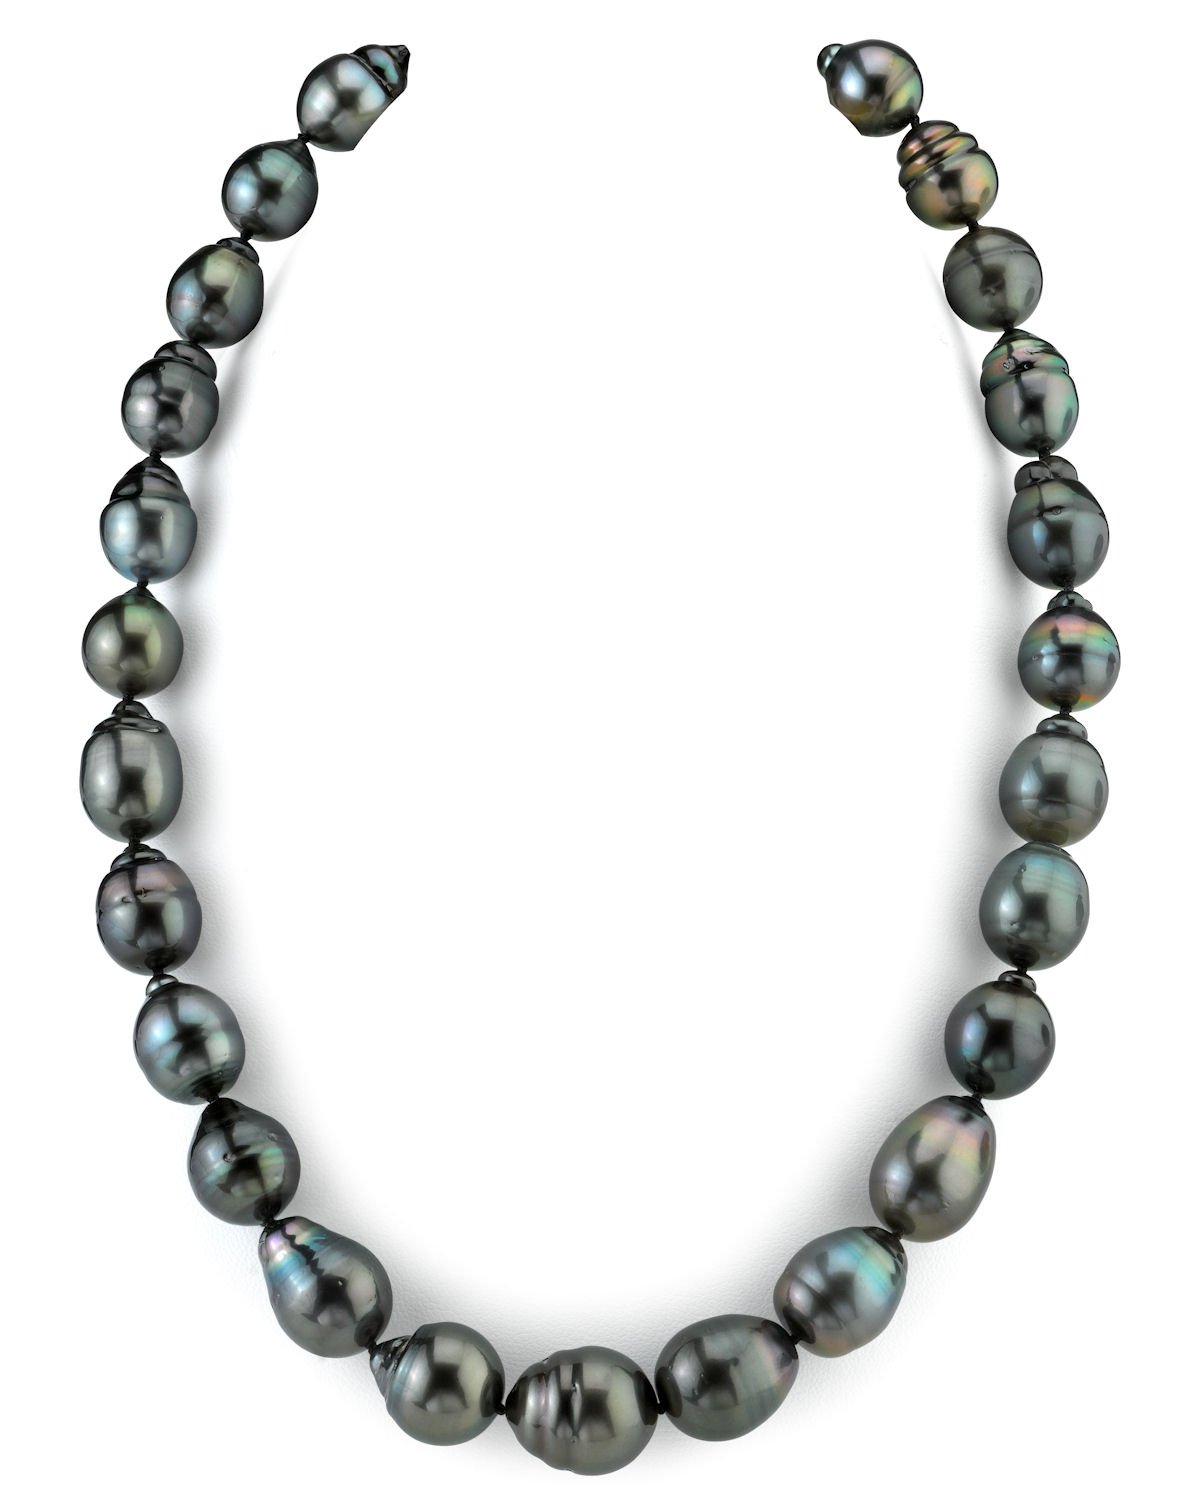 9 x 11mm Grey Baroque Tahitian Pearl Necklace 32 Inches | American Pearl